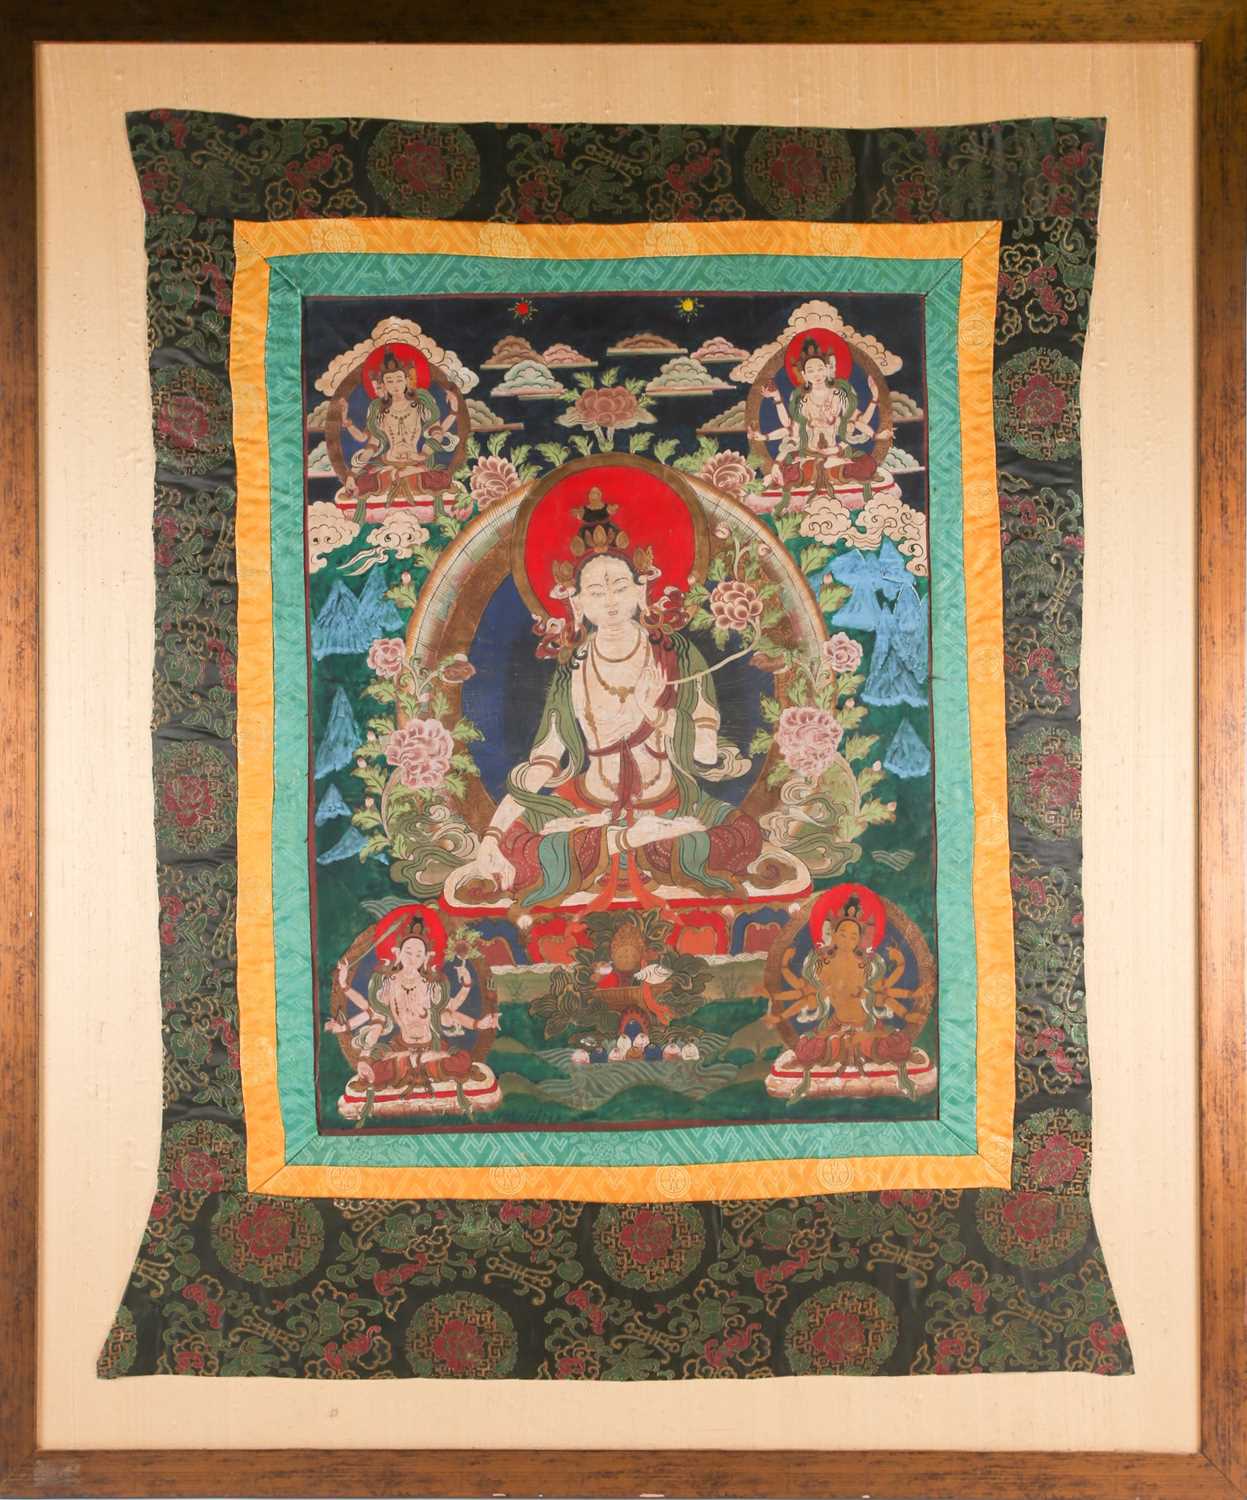 A Tibetan thangka painted on fabric depicting the seated white Tara with her hands in the varada